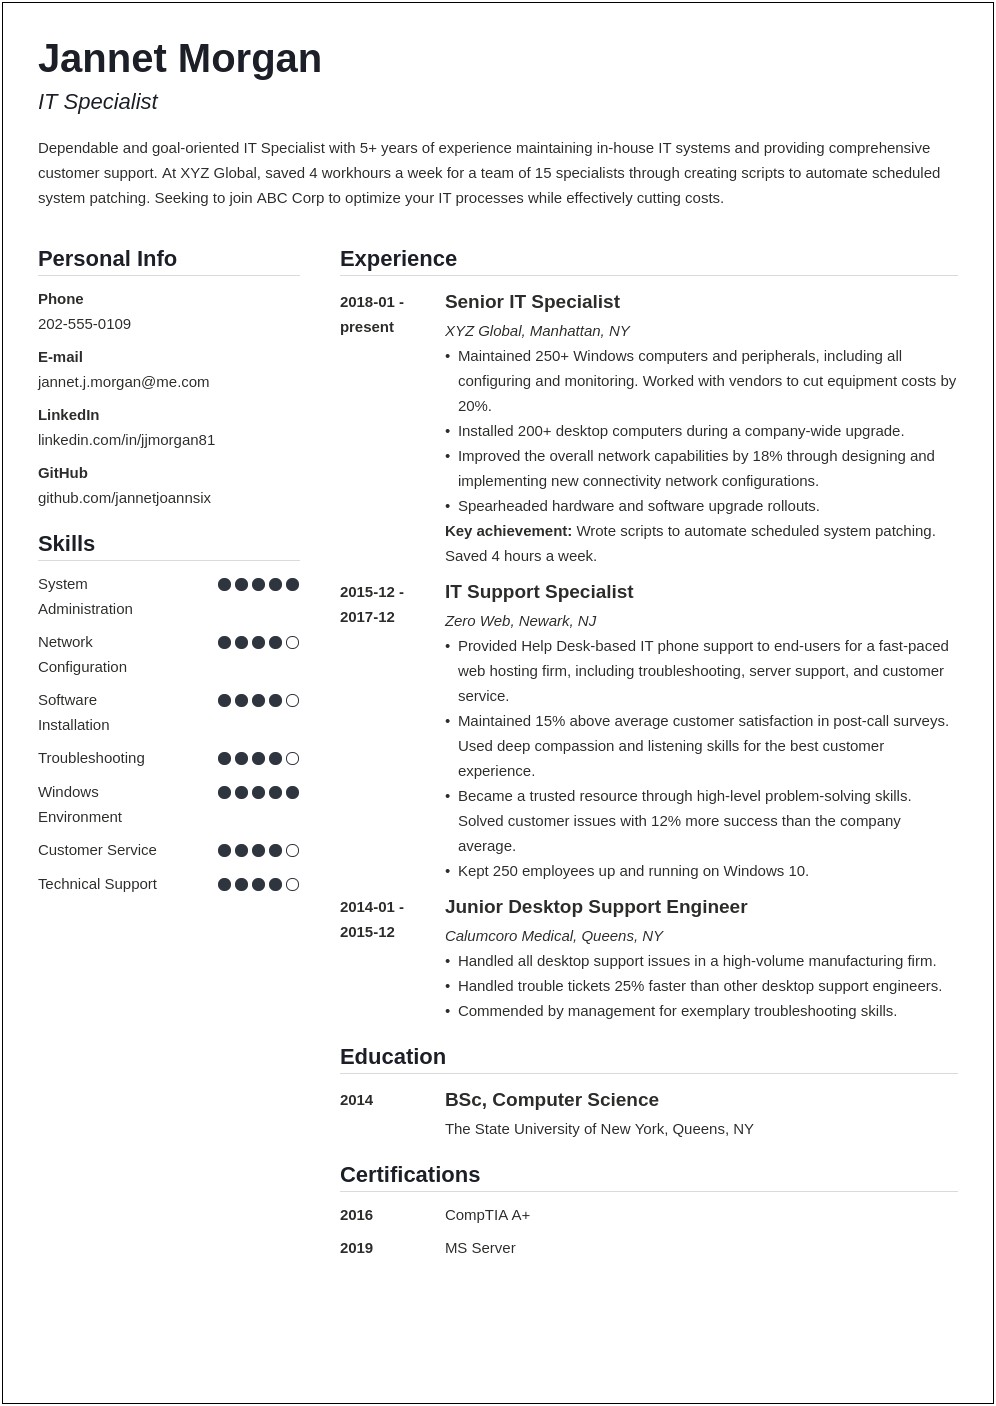 Product Support Specialist Resume Example